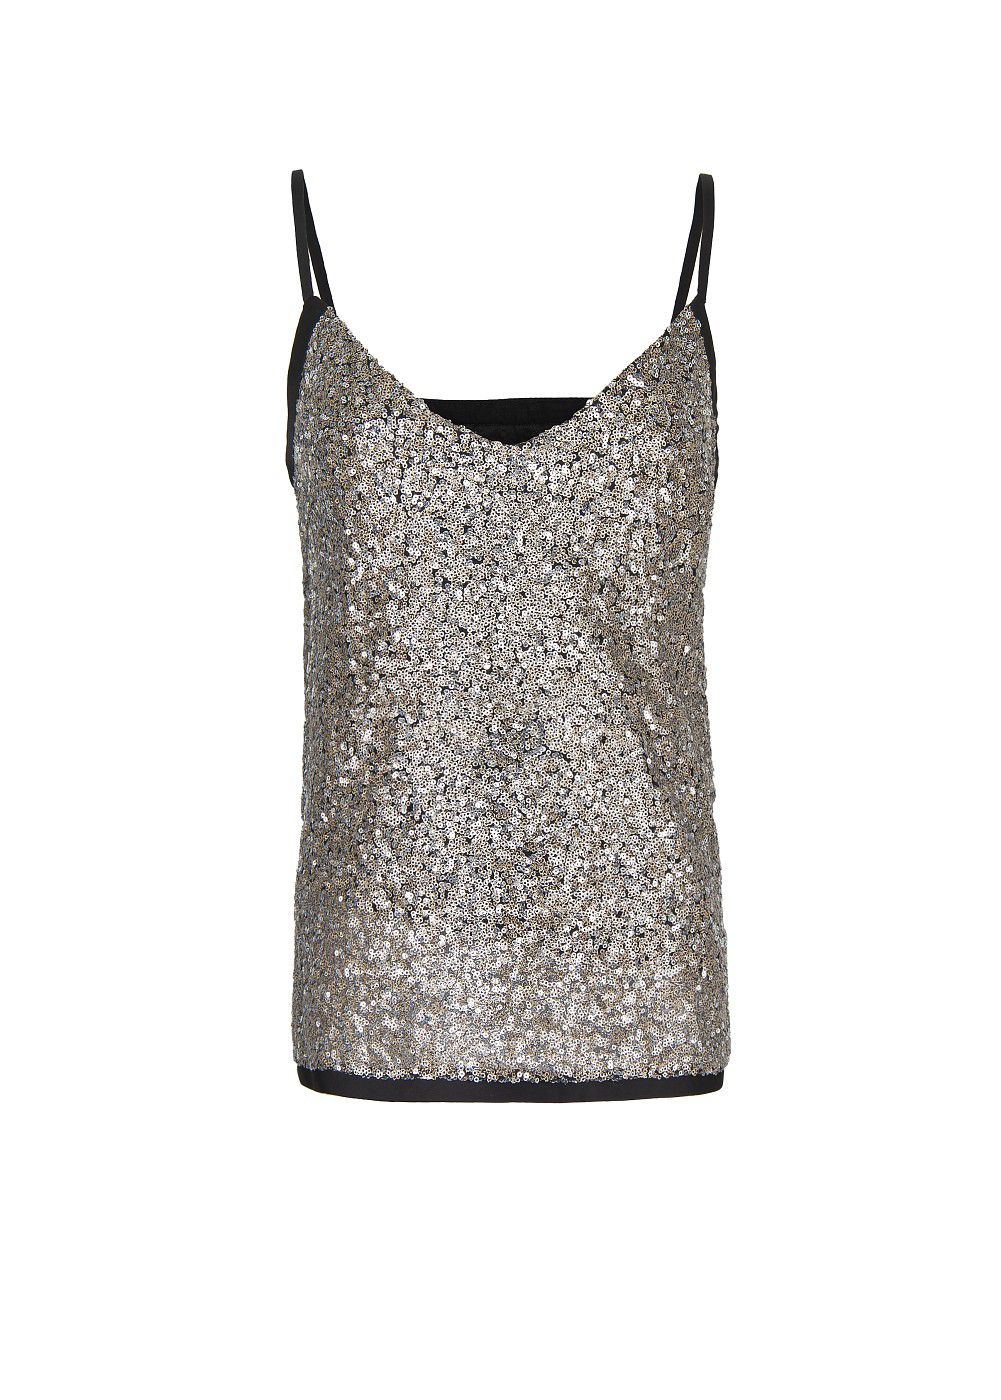 Mango Sequined Top in Silver | Lyst